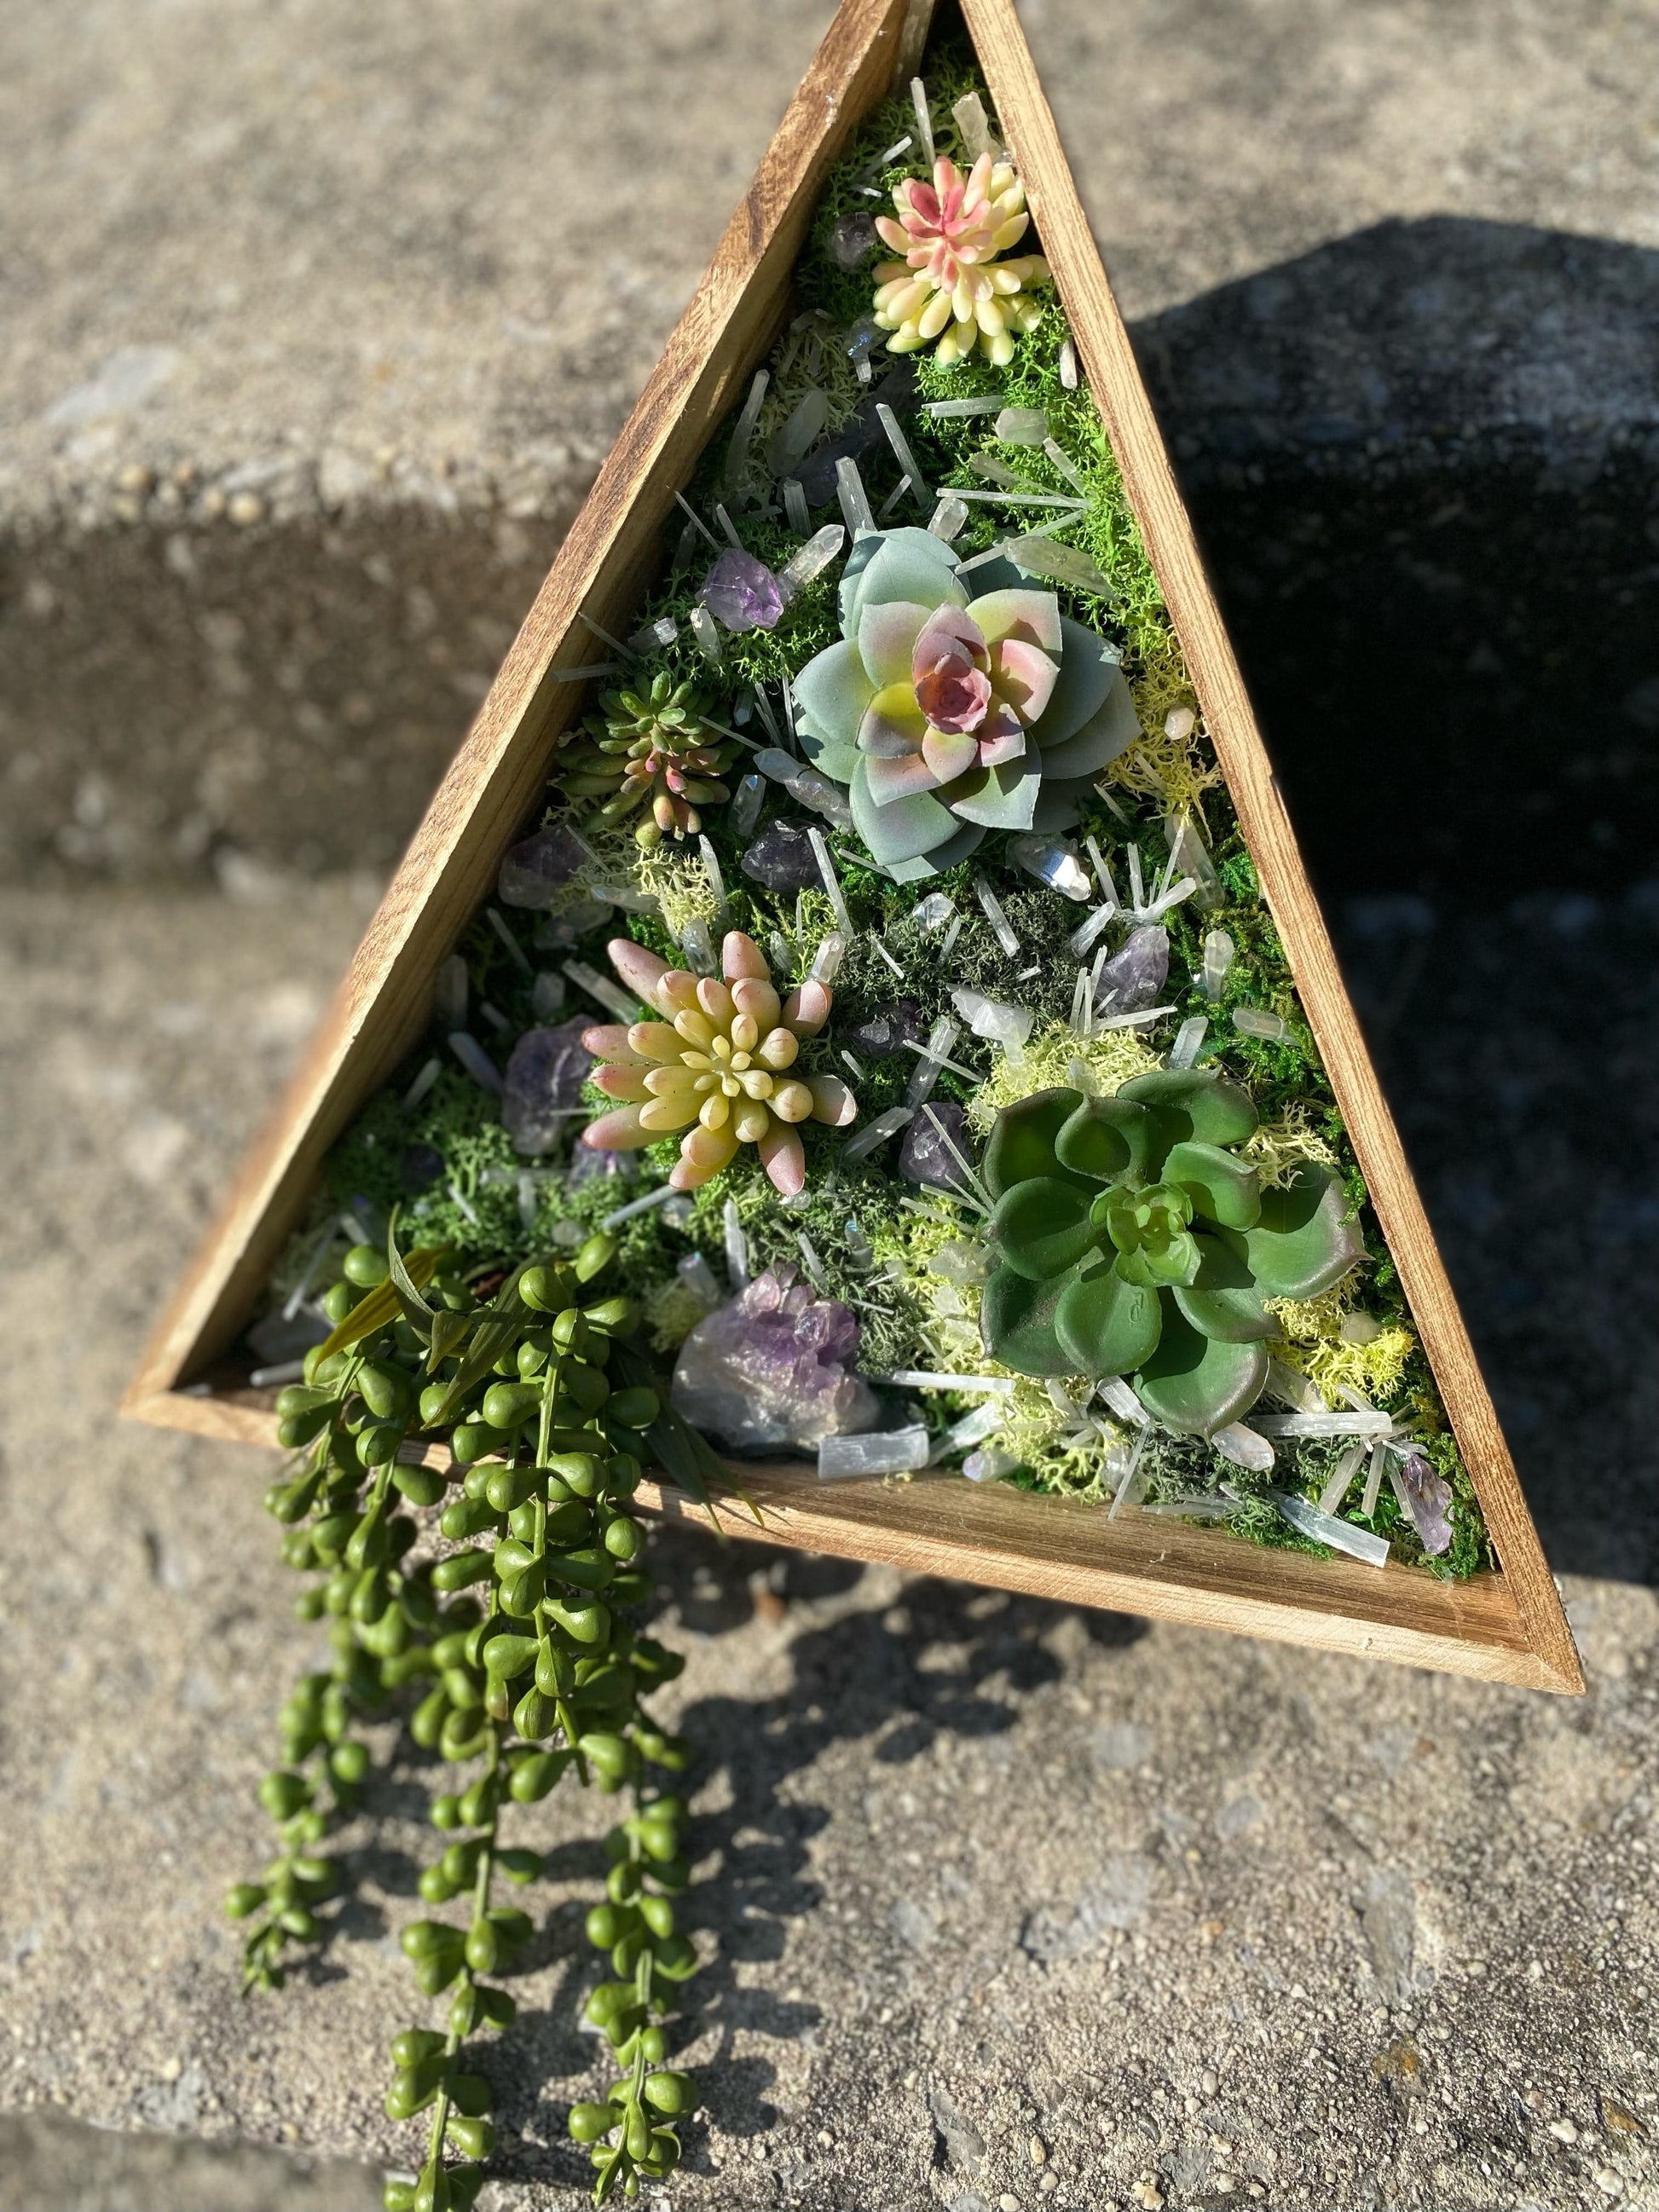 Shadow Witch Designs Moss Artificial Succulents and Crystals Wall Hanging Display Decor MASCWHDD